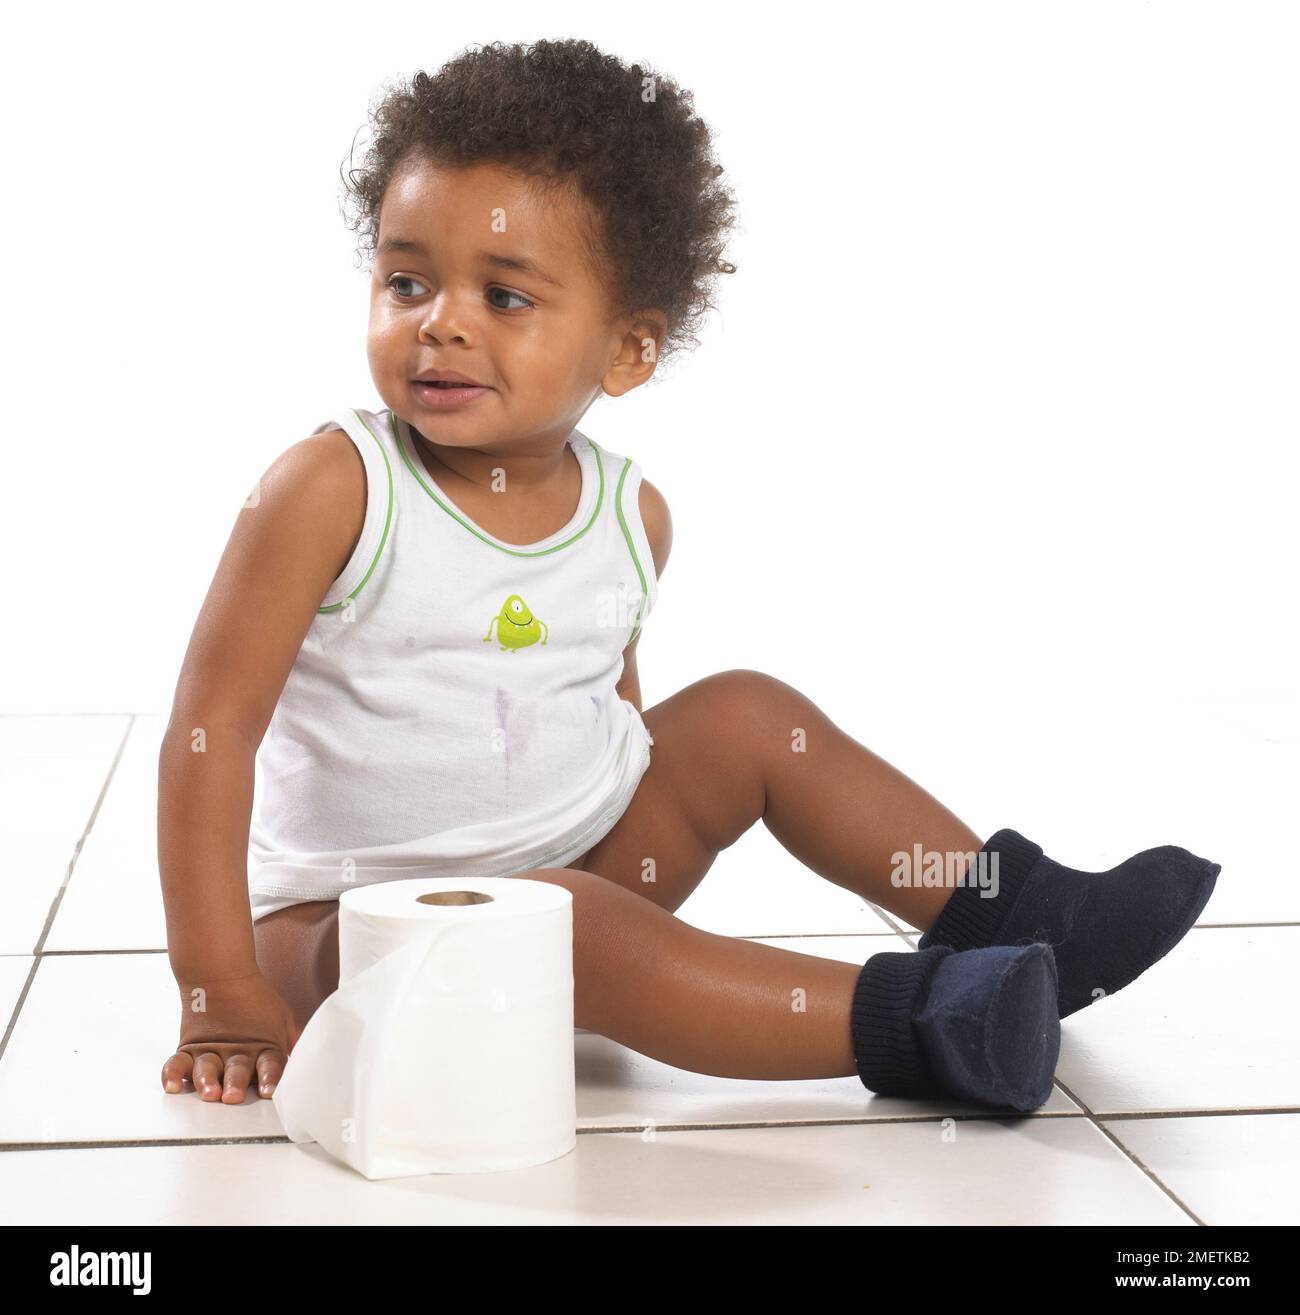 Boy wearing vest and slippers sitting on floor with roll of toilet paper, 17 months Stock Photo